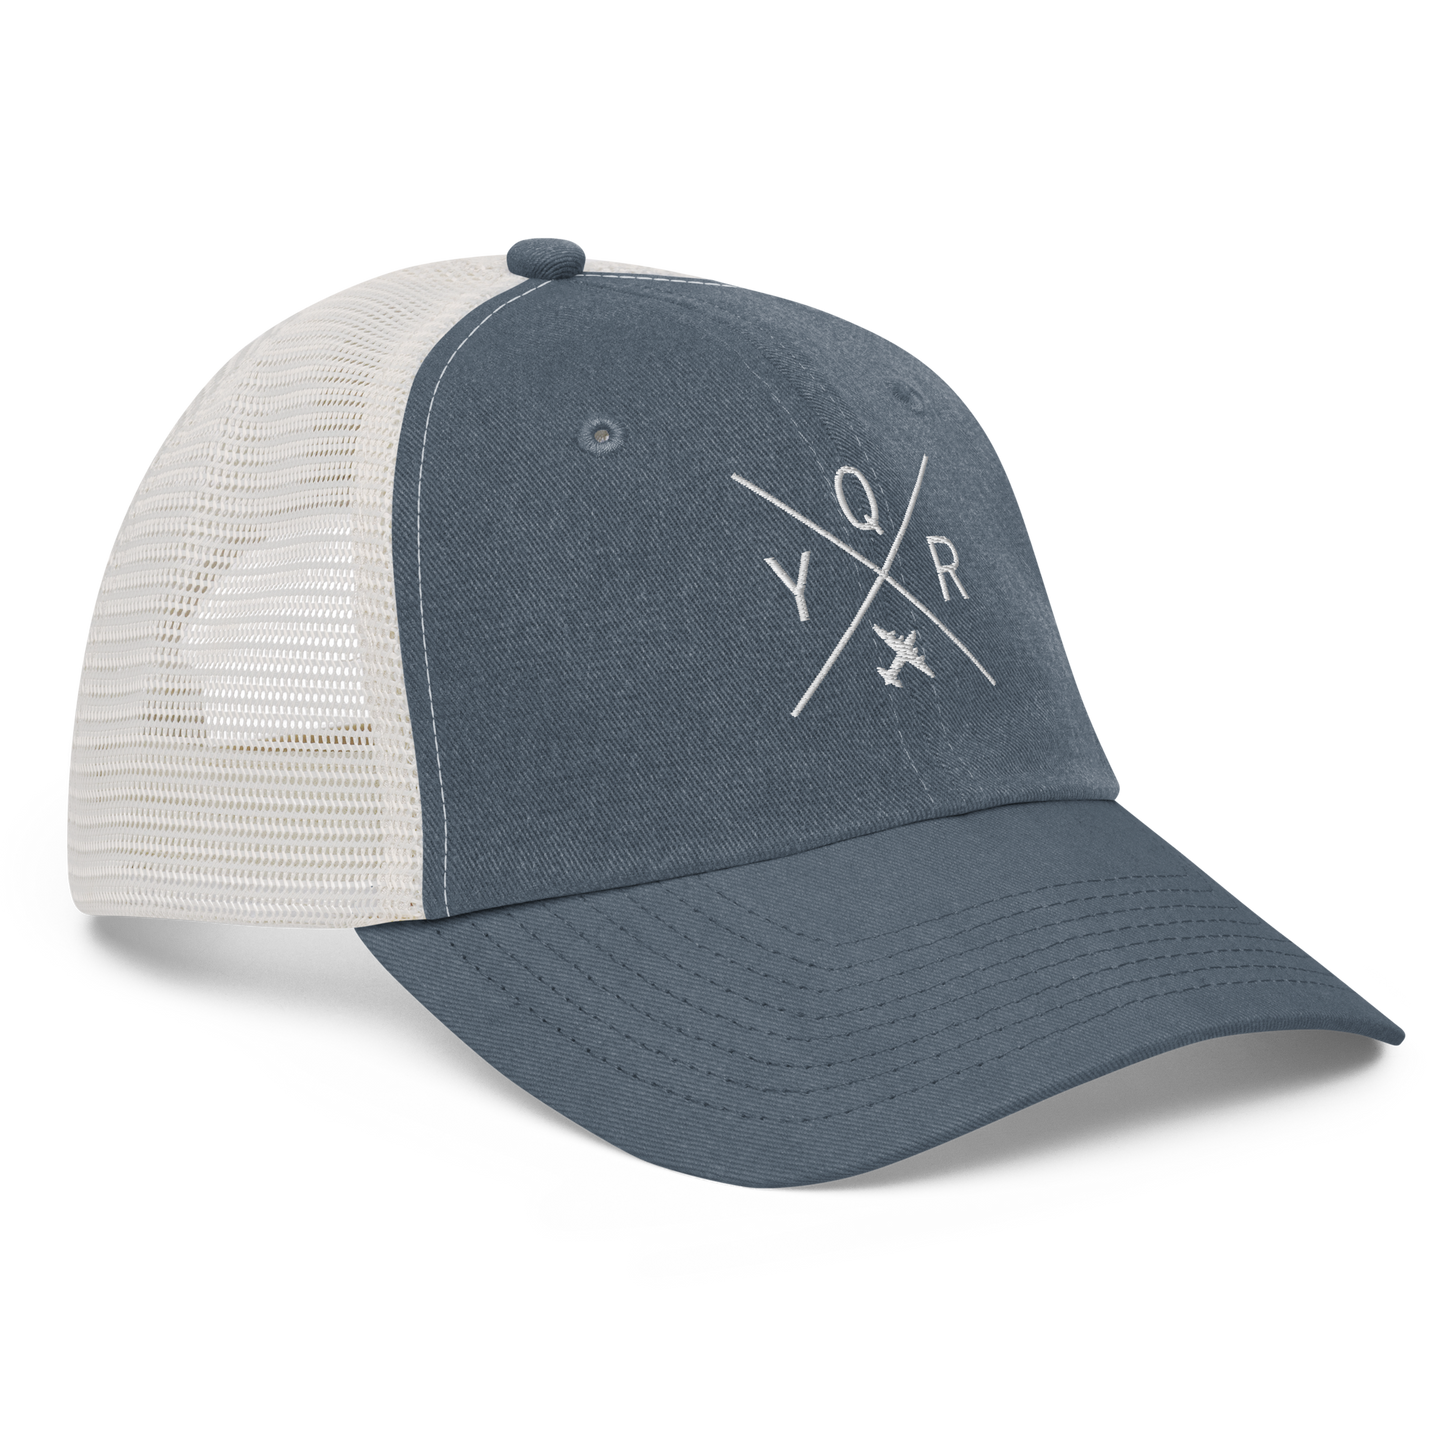 YHM Designs - YQR Regina Pigment-Dyed Trucker Cap - Crossed-X Design with Airport Code and Vintage Propliner - White Embroidery - Image 07